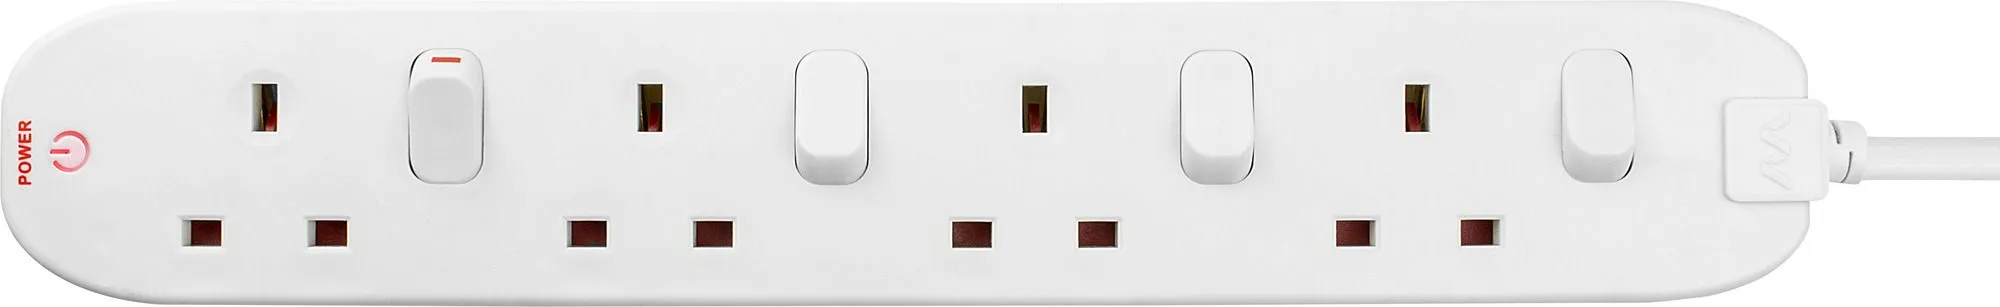 Masterplug 4 socket 13A Switched White Extension lead, 2m